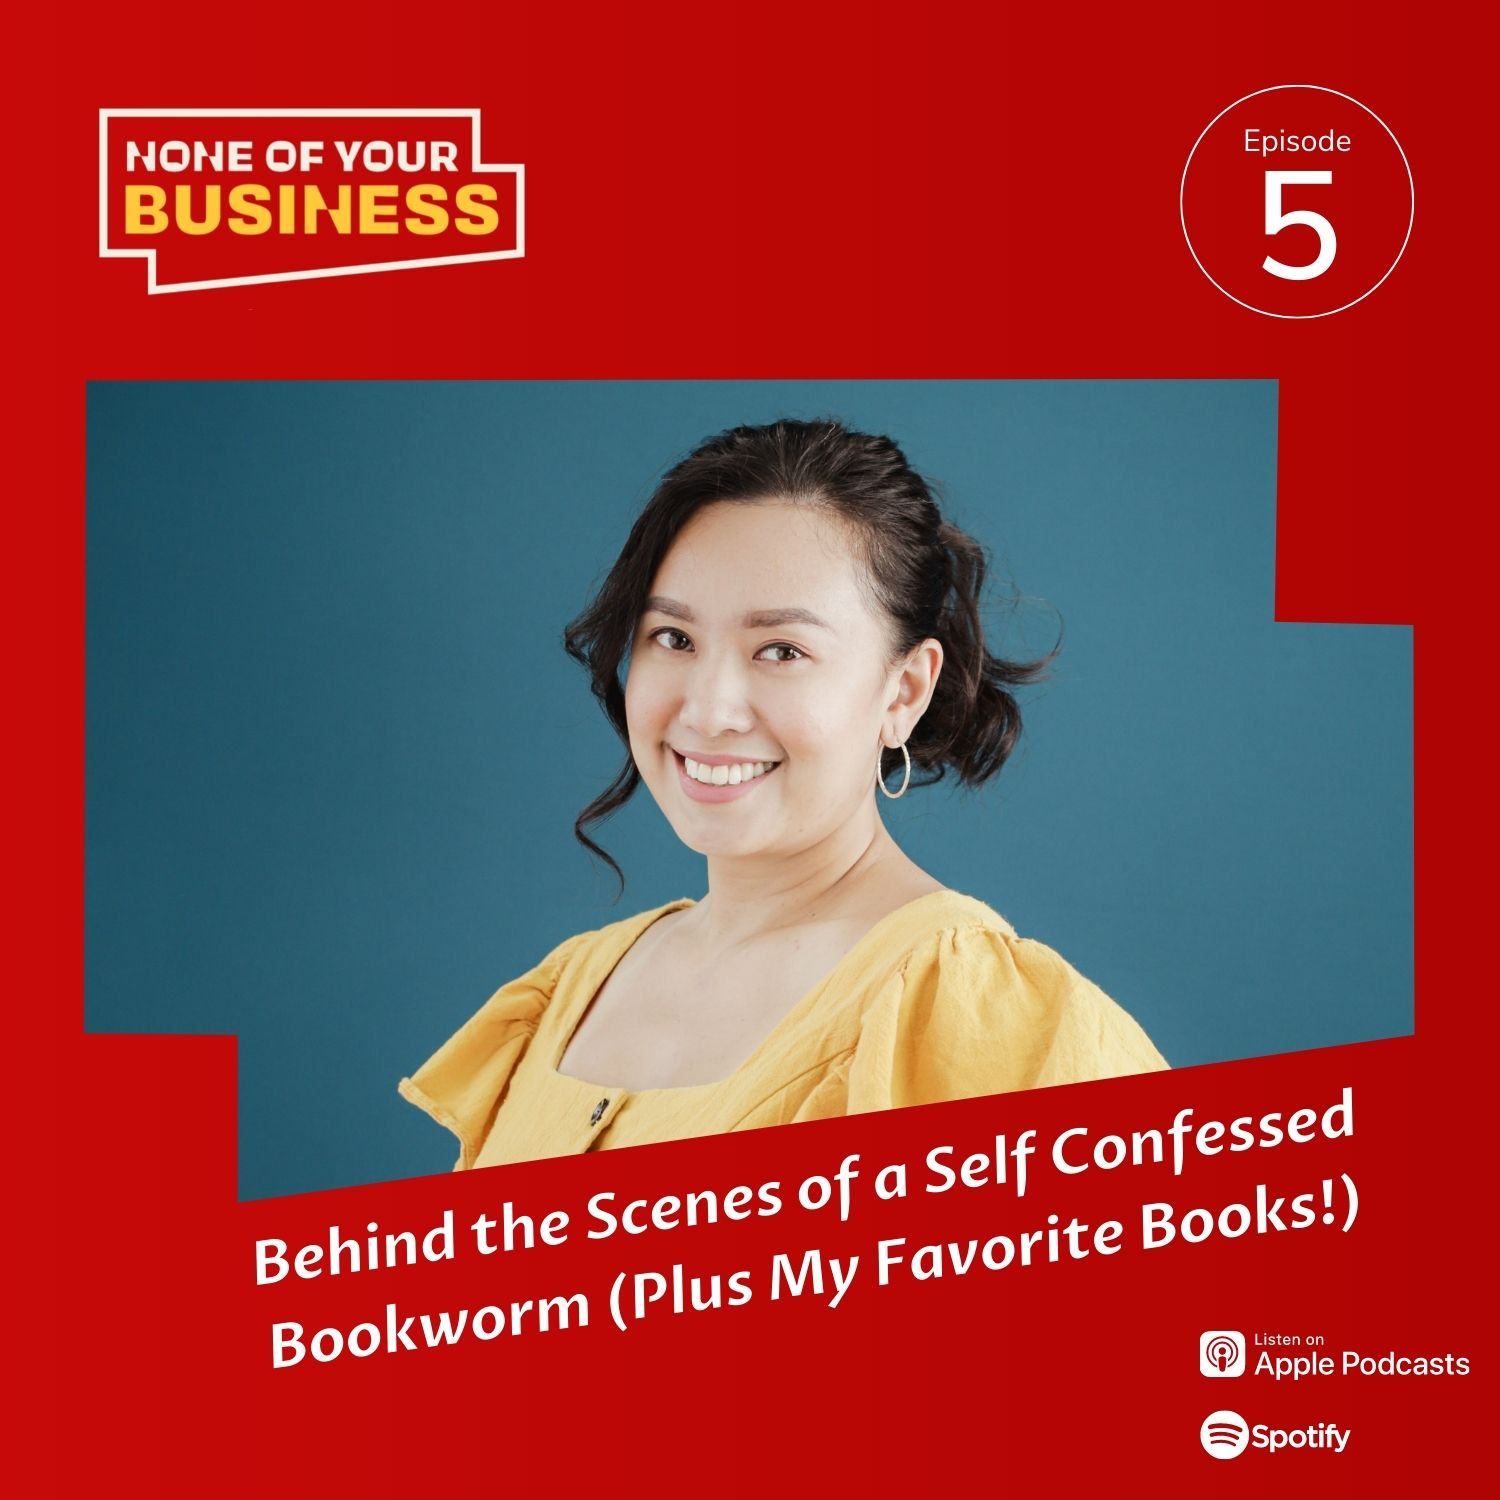 Behind the Scenes of a Self Confessed Bookworm (Plus My Favorite Books!)